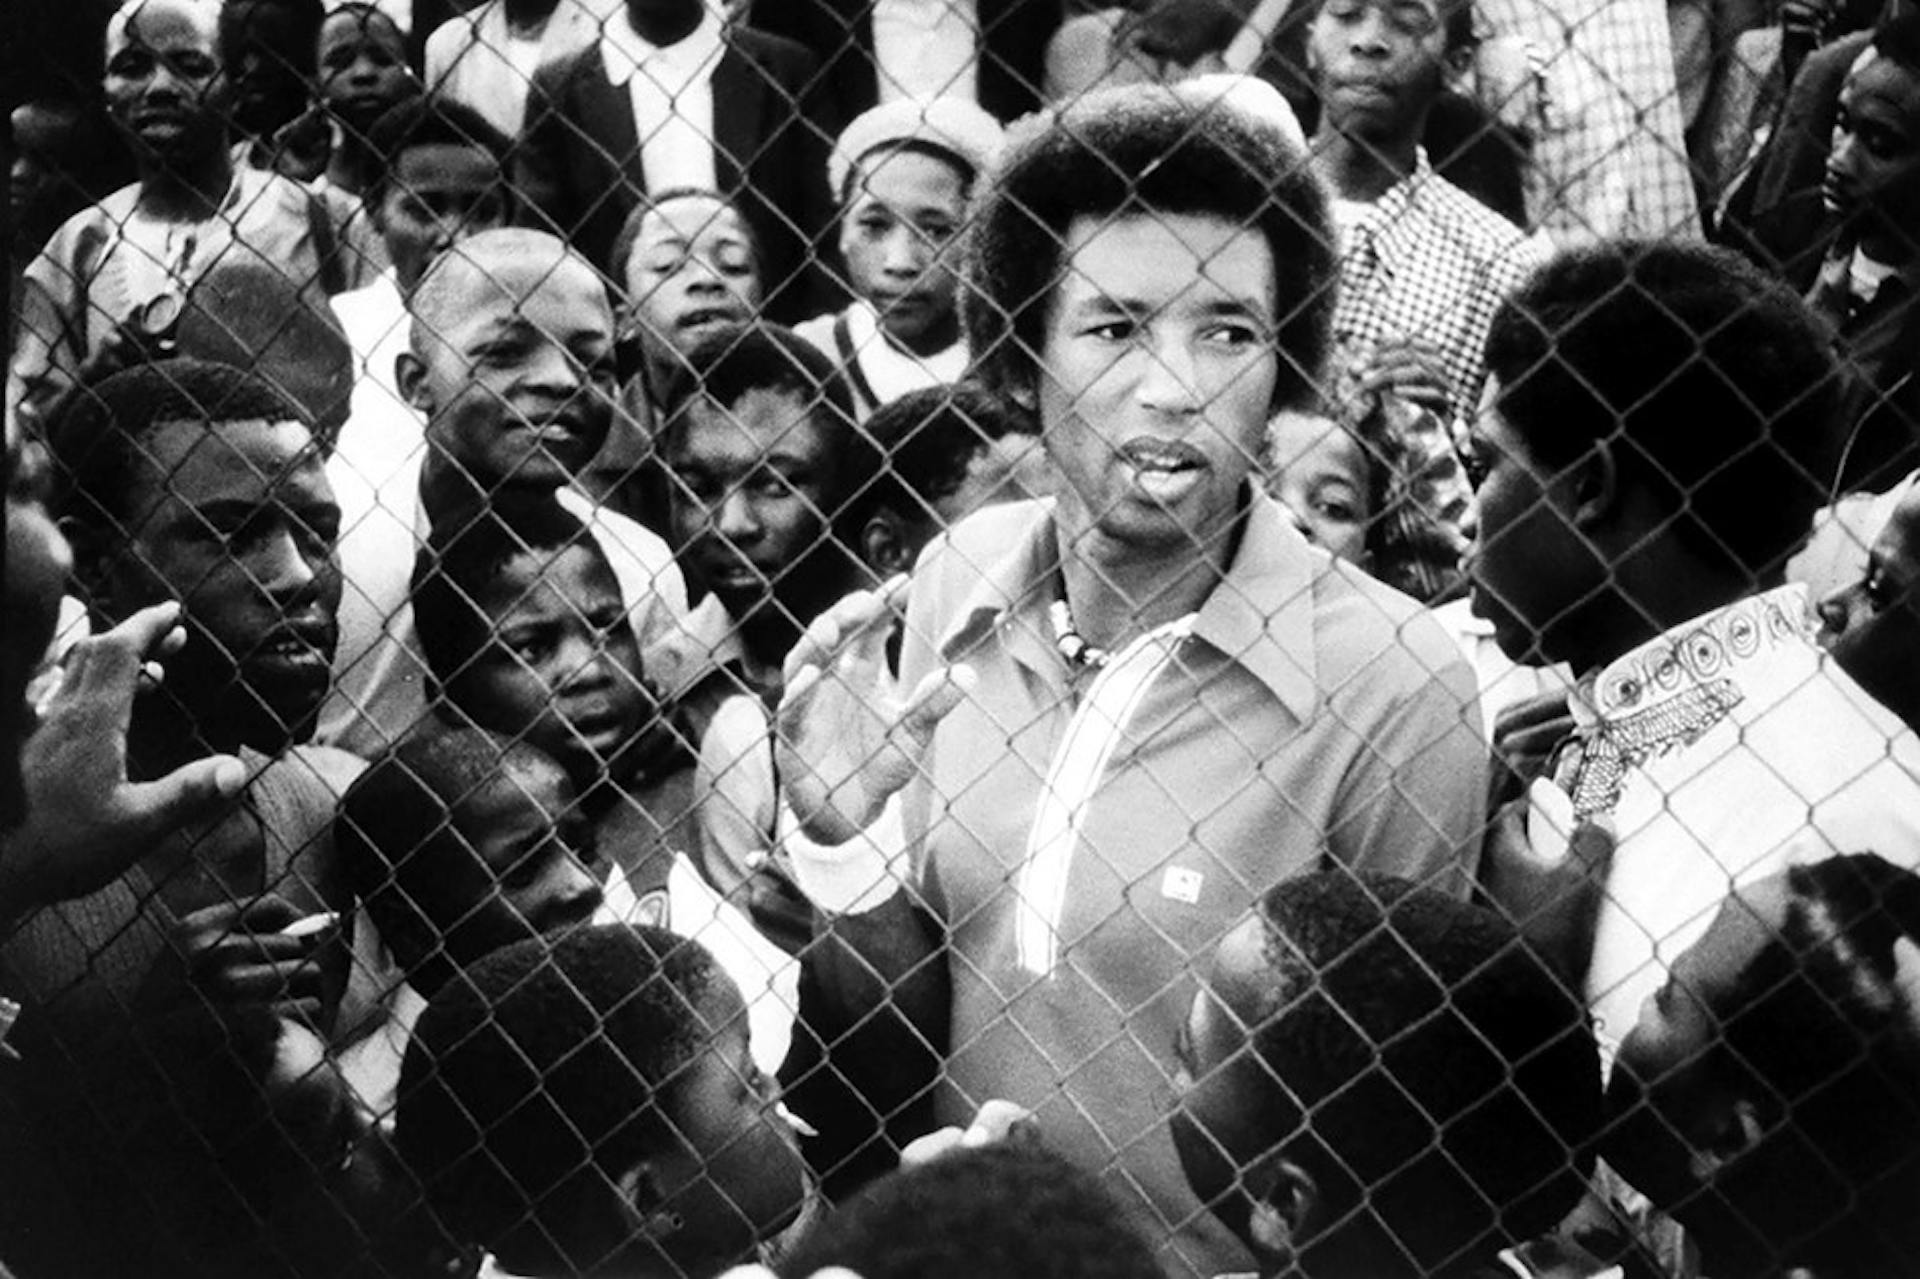 Arthur Ashe in Soweto behind a chain link fence surrounded by a group of young black people.